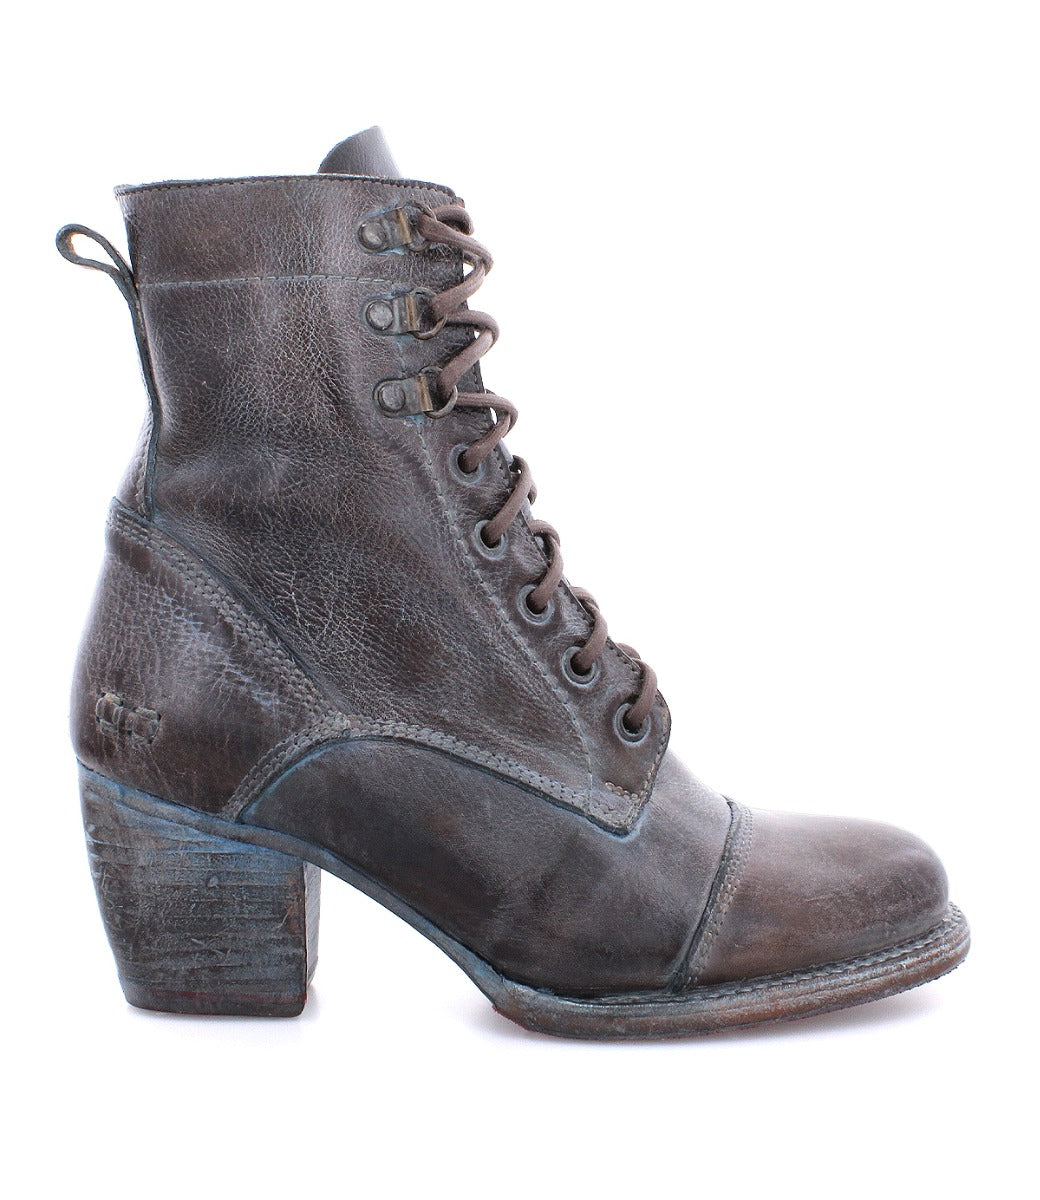 A women's brown leather Judgement ankle boot by Bed Stu.